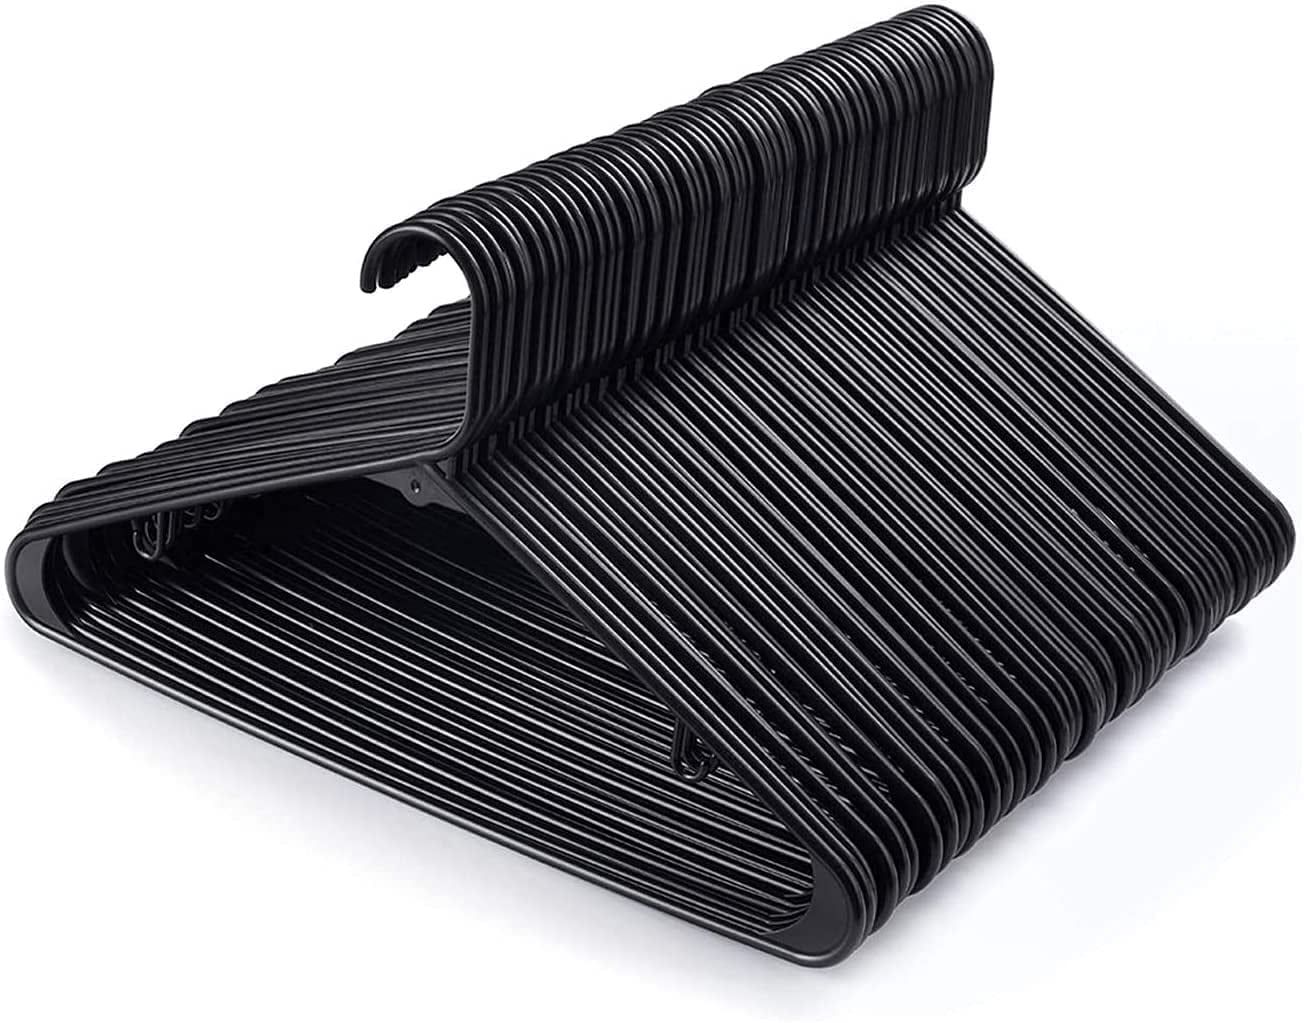 Plastic Hangers HD Heavy Duty, 40 Pcs. Black Color, Made in USA, 3/8”  Thickness, Durable, Tubular, Lightweight, for Clothes, Coat, Pants, Shirts